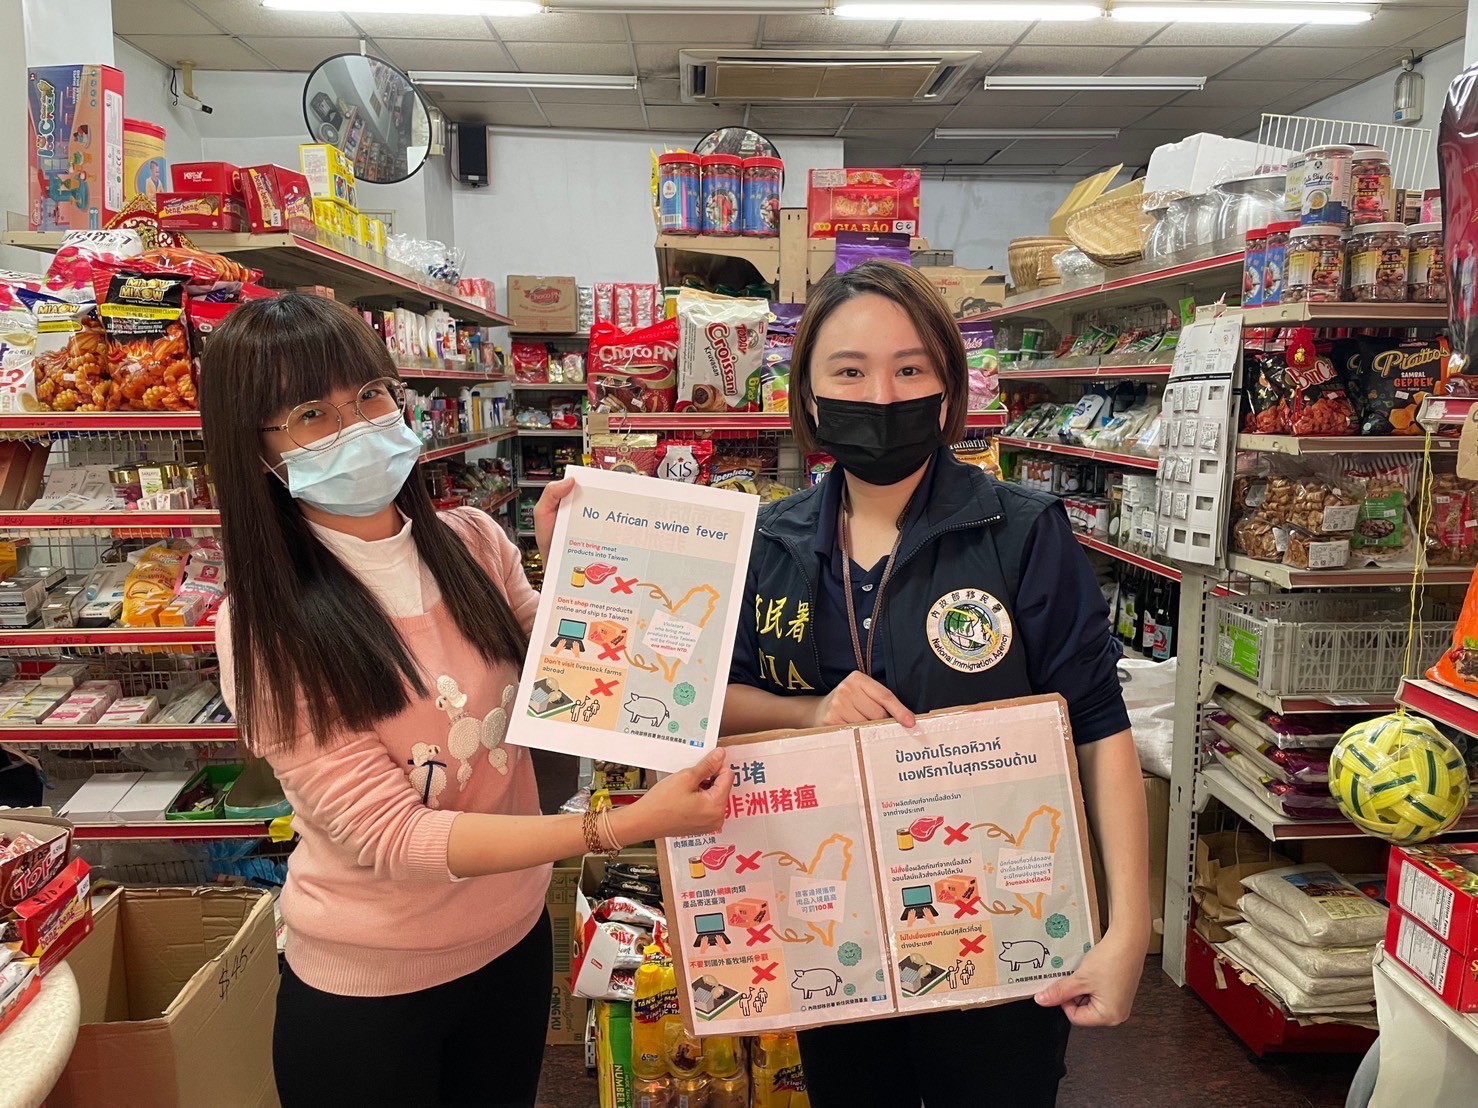 Multilingual posters offered to promote “Prevention of African Swine Fever” to new immigrants in Taiwan. (Photo / Provided by Kaohsiung Brigade)